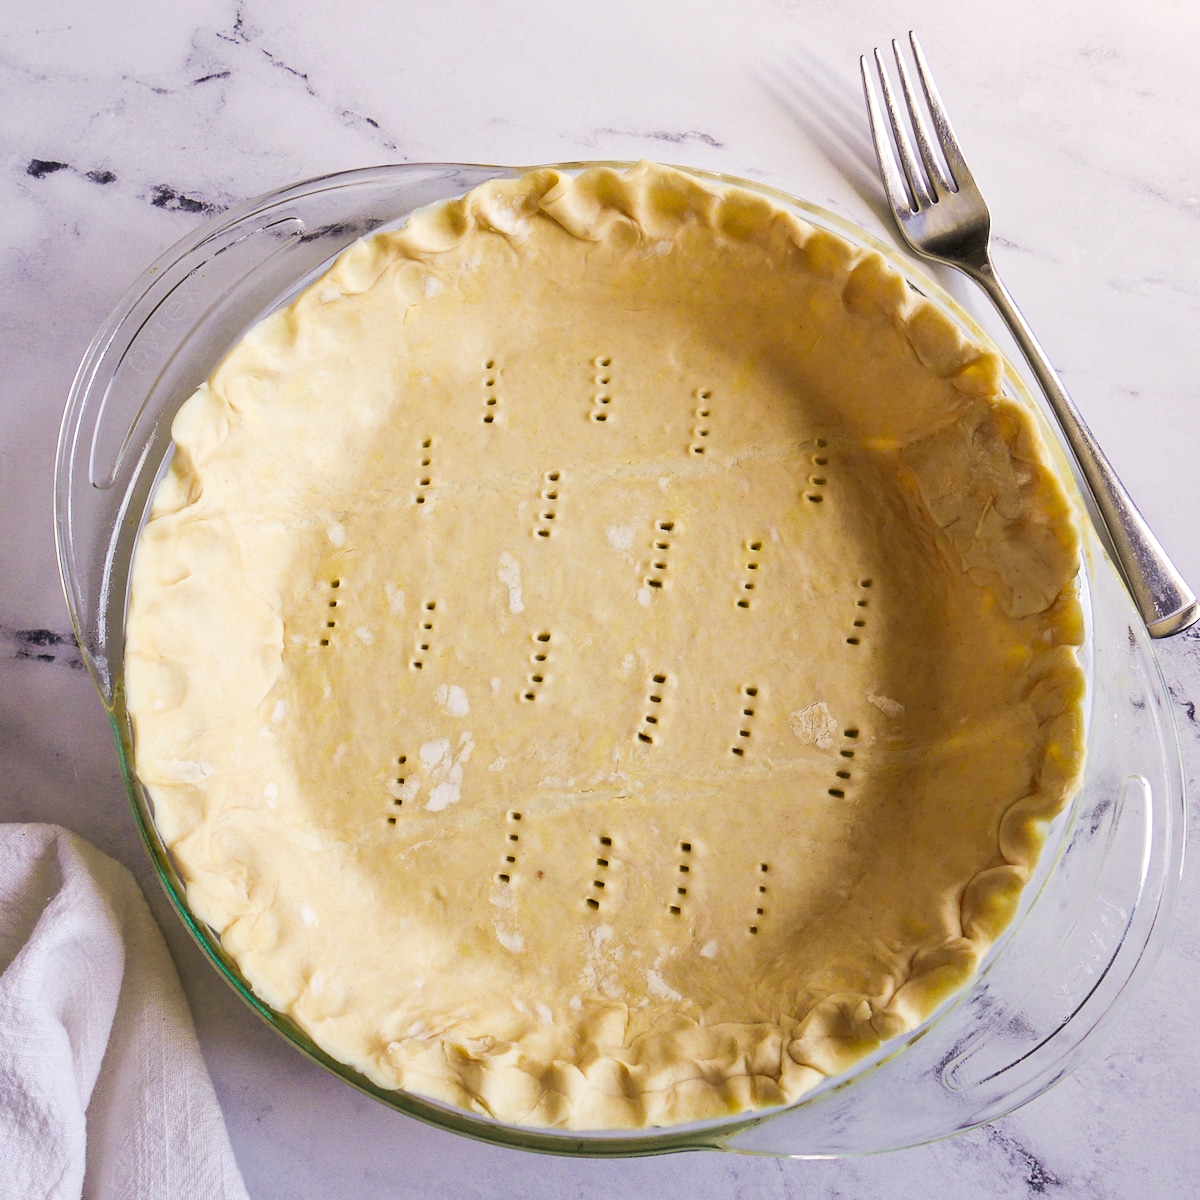 Puff pastry placed into a pie pan and pierced with a fork.